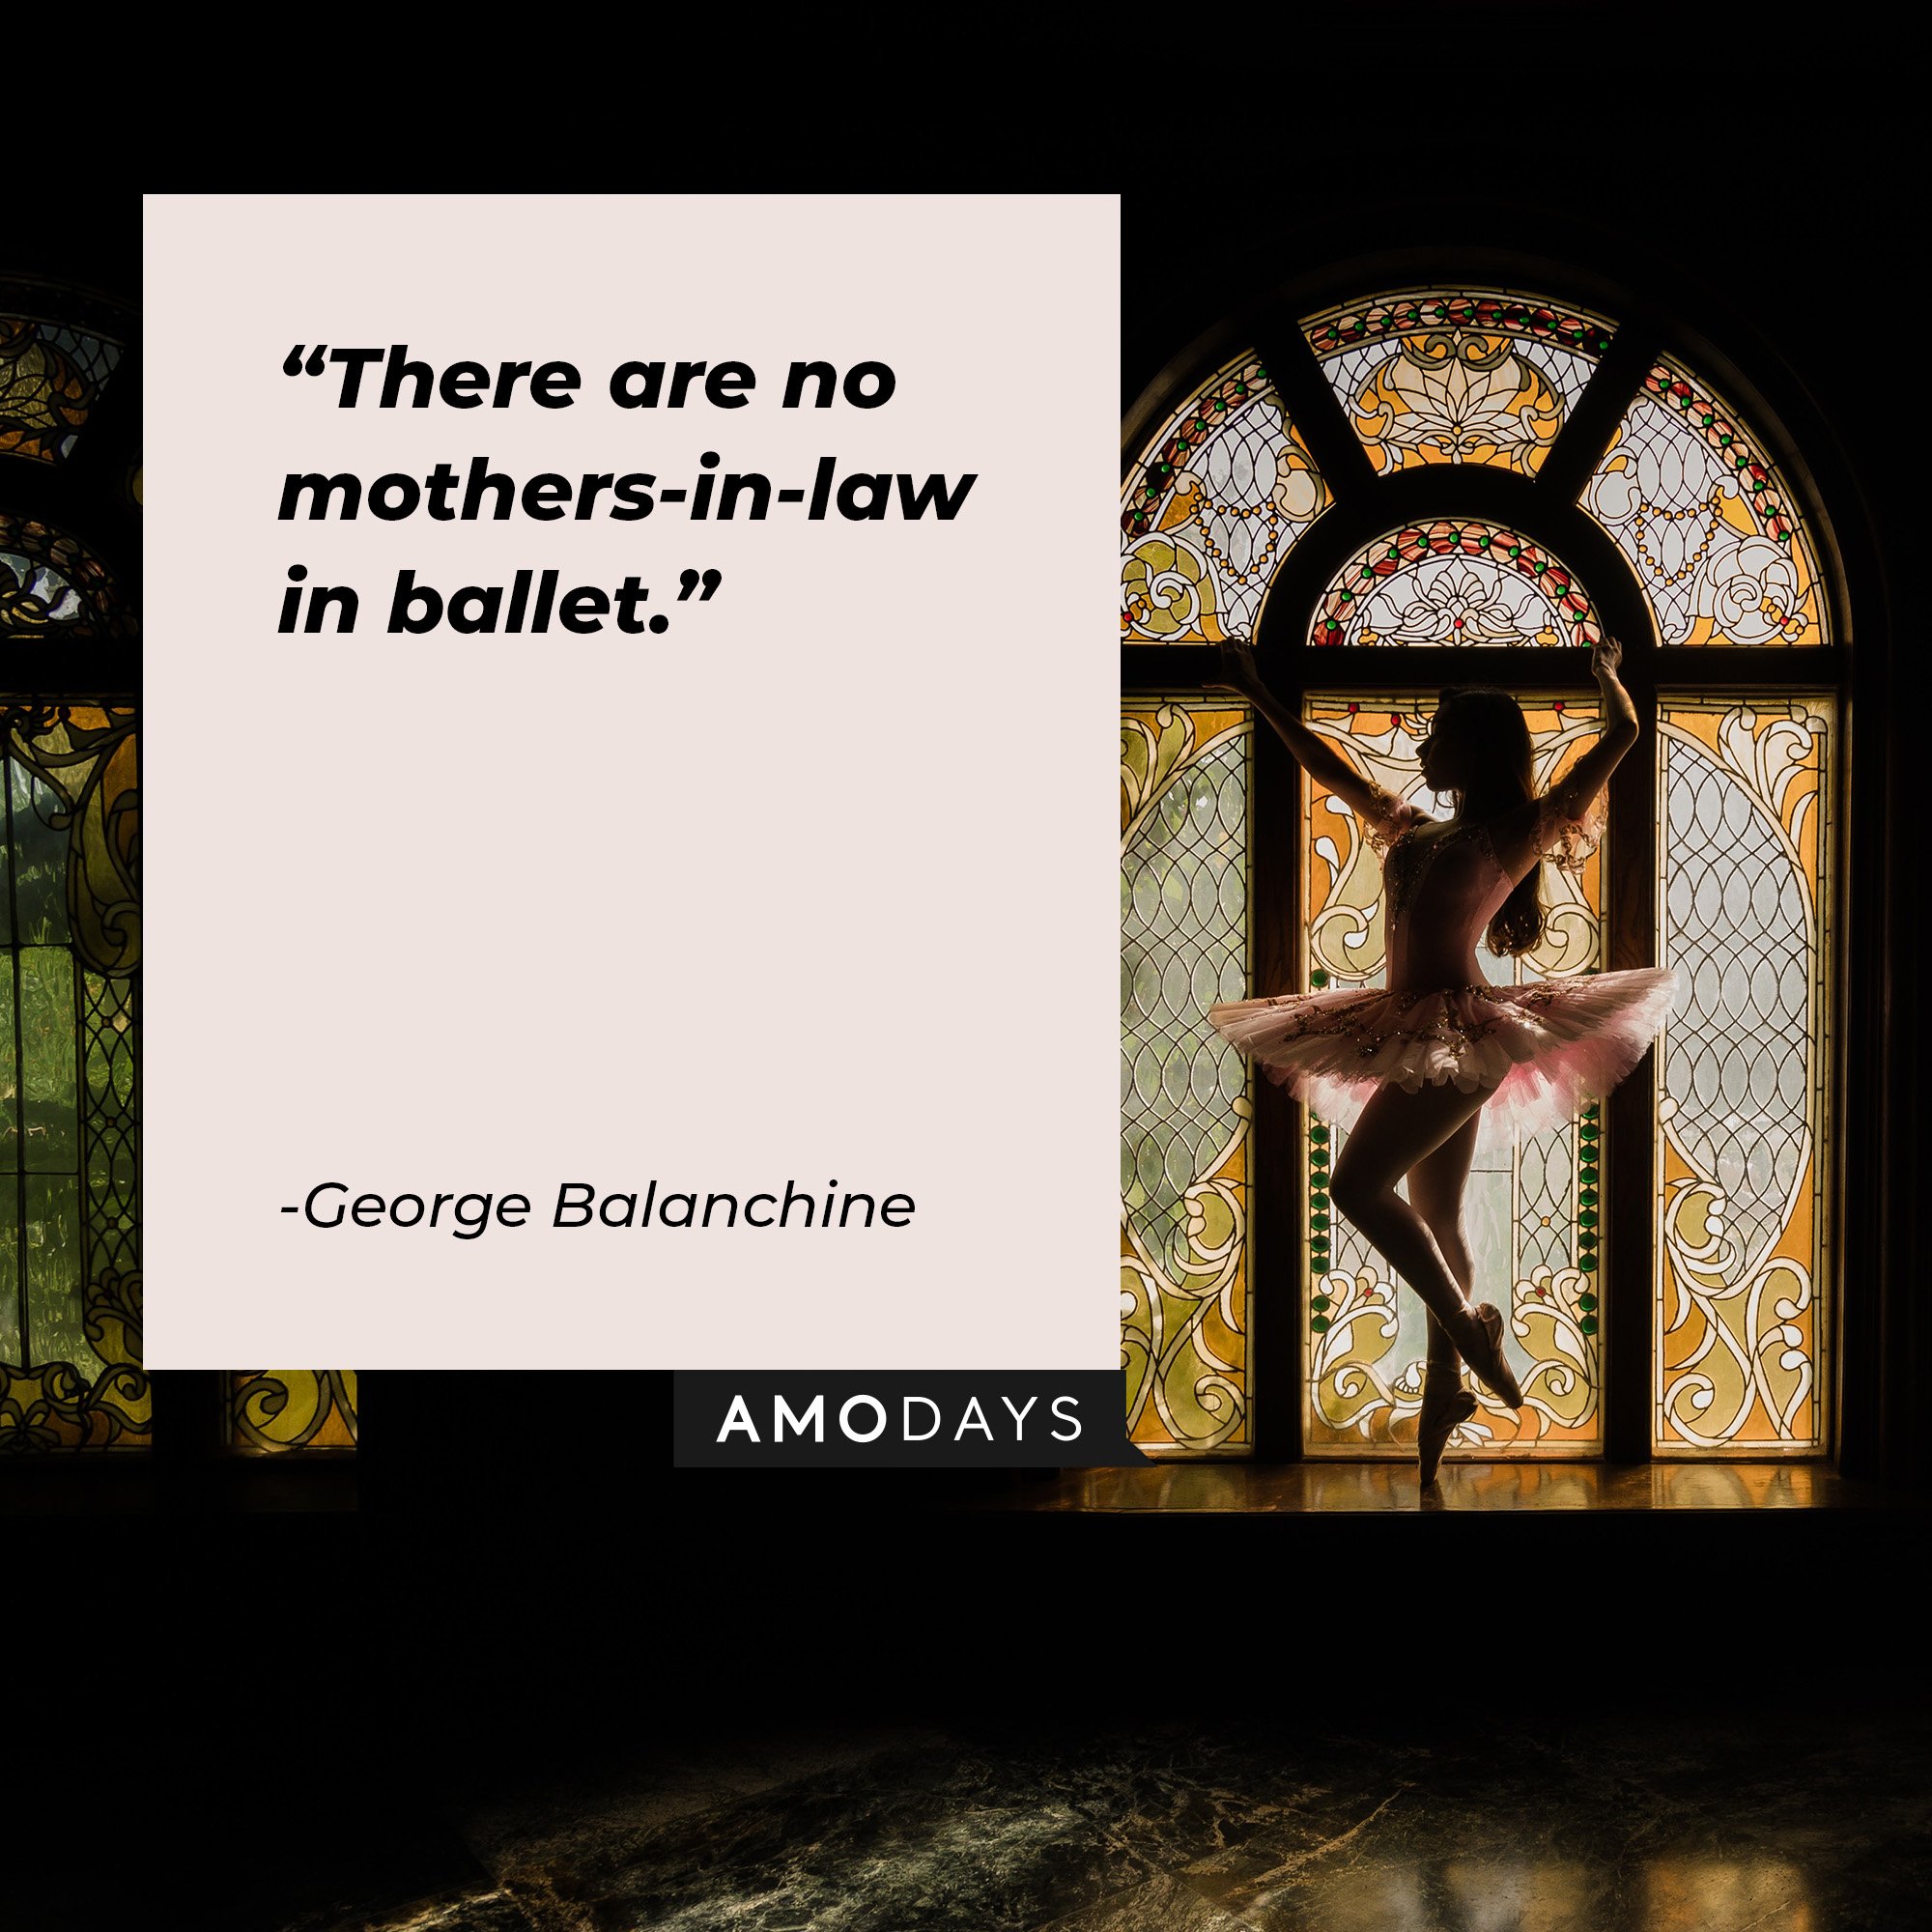 George Balanchine’s quote: "There are no mothers-in-law in ballet." | Image: AmoDays